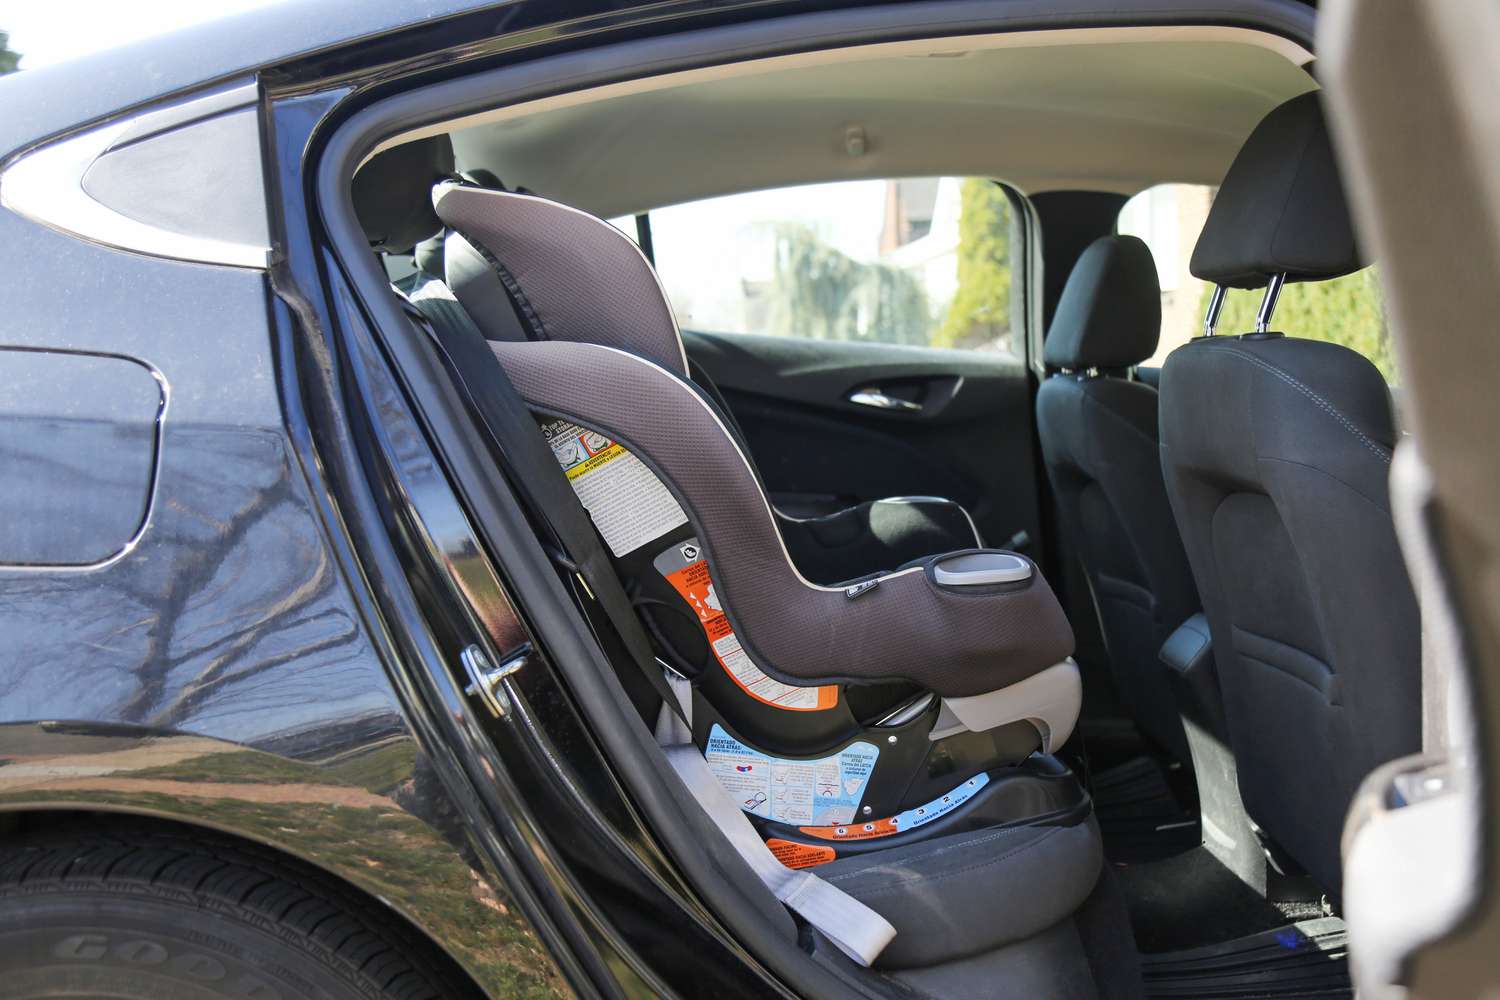 The Graco Extend2Fit Convertible Car Seat installed in a car